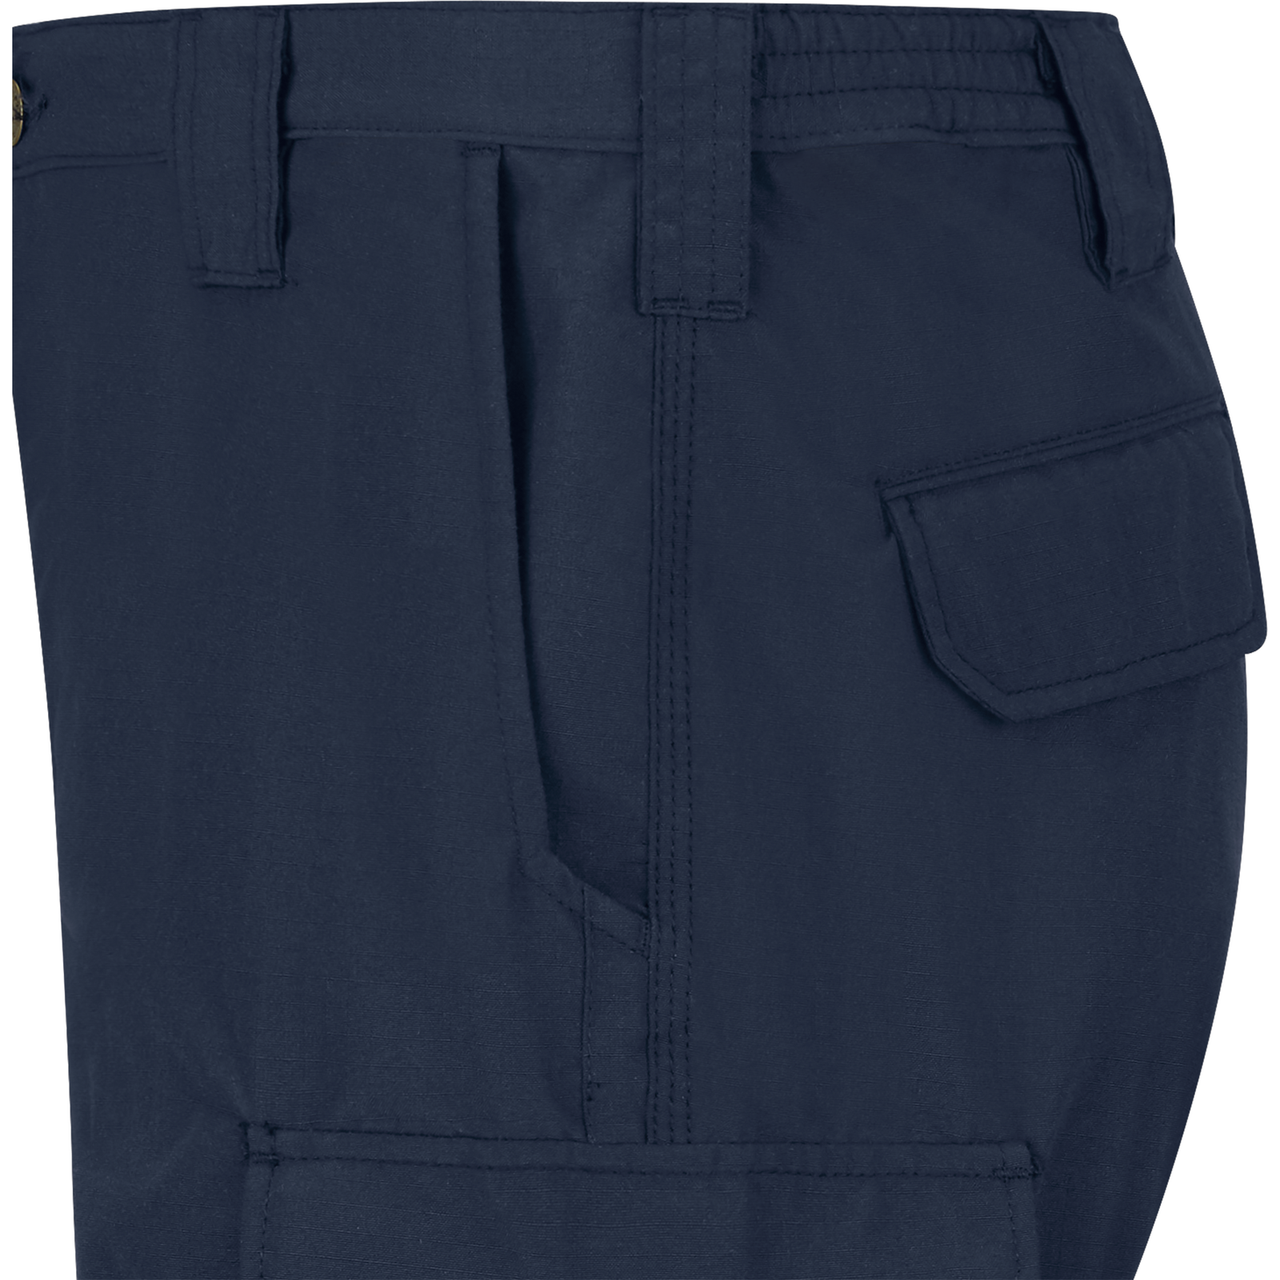 Workrite FR Tactical Ripstop Pant (FP40)  | Fire Store | Fuego Fire Center | Firefighter Gear | The Tactical Ripstop Pant has articulated knees for easy movement as well as side-elastic on the waistband for added comfort and extra-wide belt loops. These flame-resistant pants have front slack style pockets with utility notch and cargo pockets for additional storage.